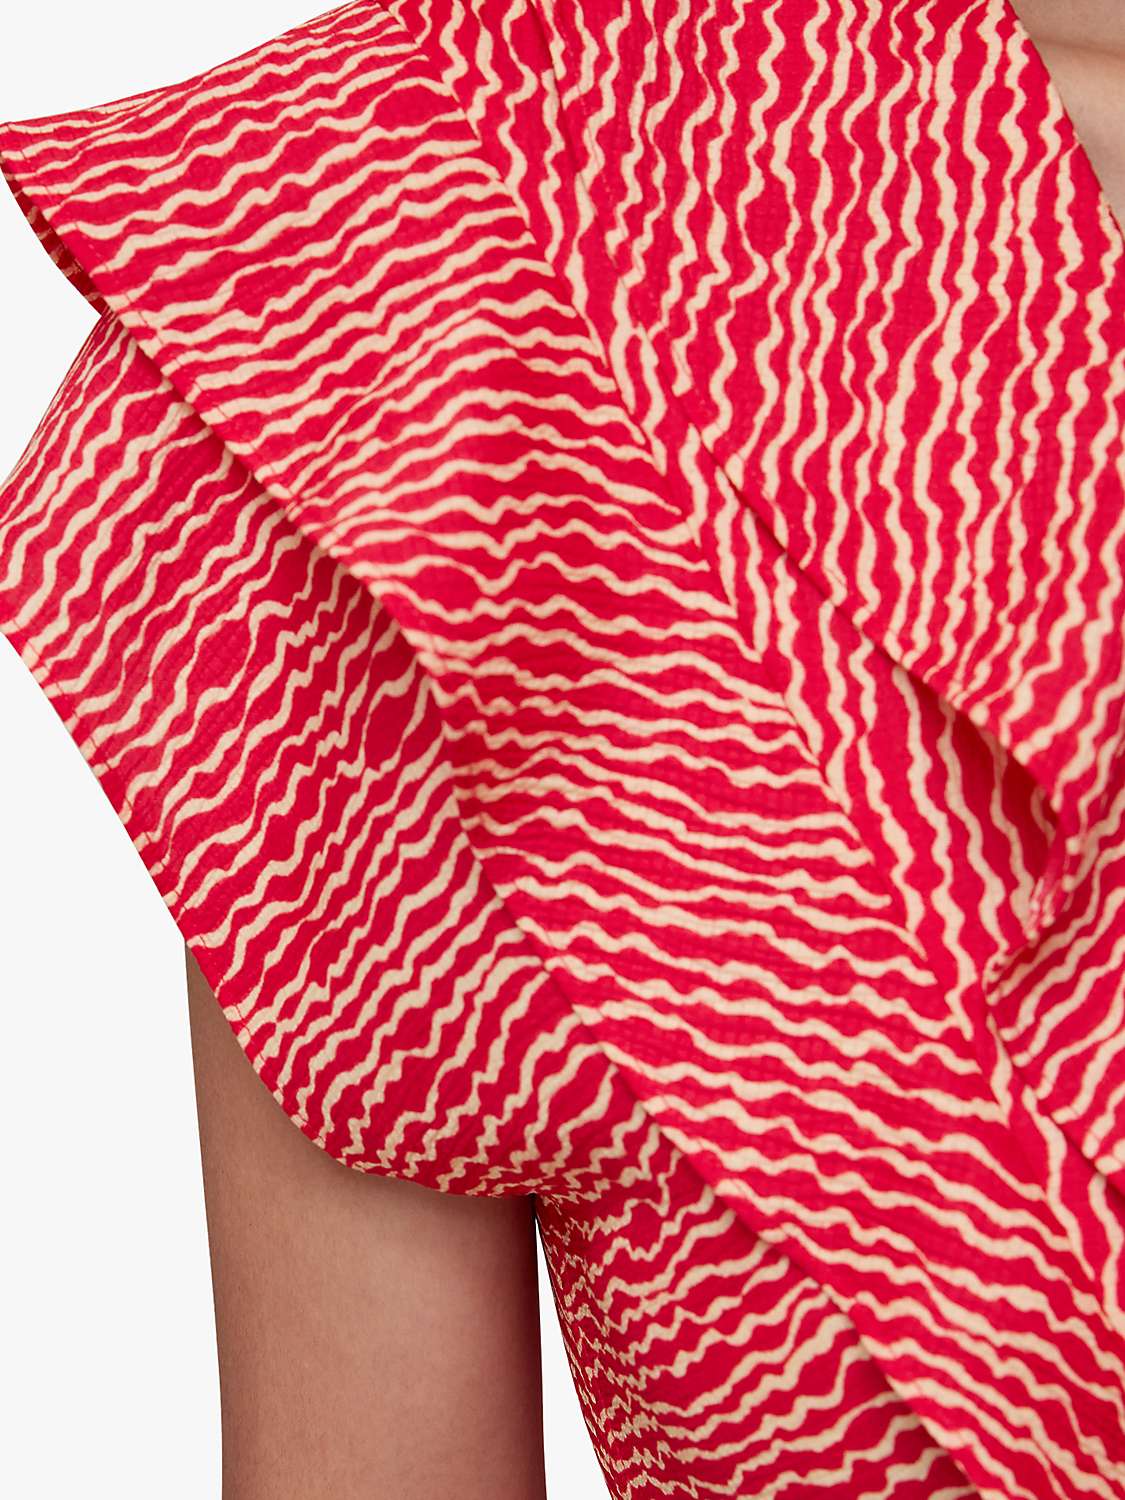 Buy Whistles Wiggly Lines Adeline Midi Dress, Red/Multi Online at johnlewis.com